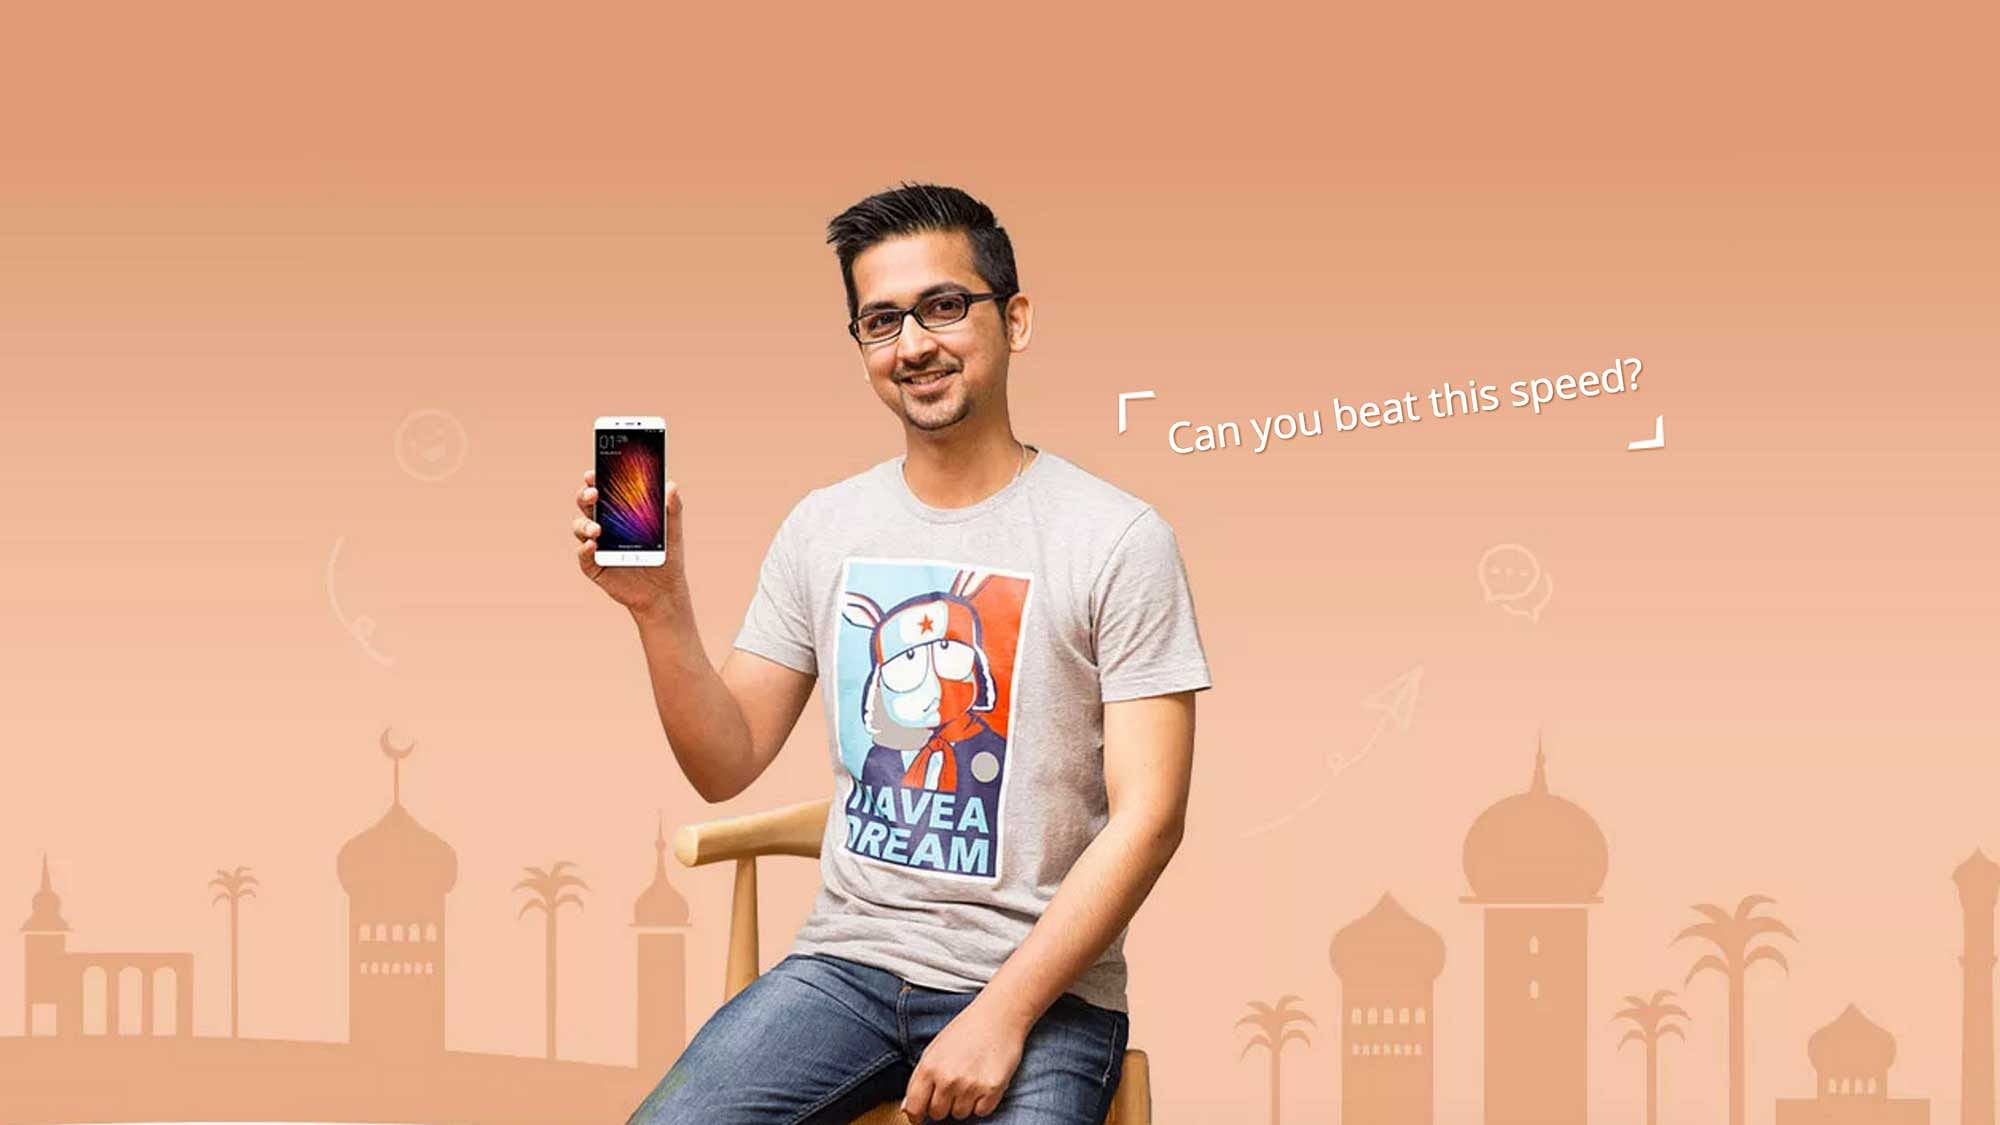 Xiaomi Mi5 all set to launch in India on 31 March 2016. (Photo: Xiaomi)